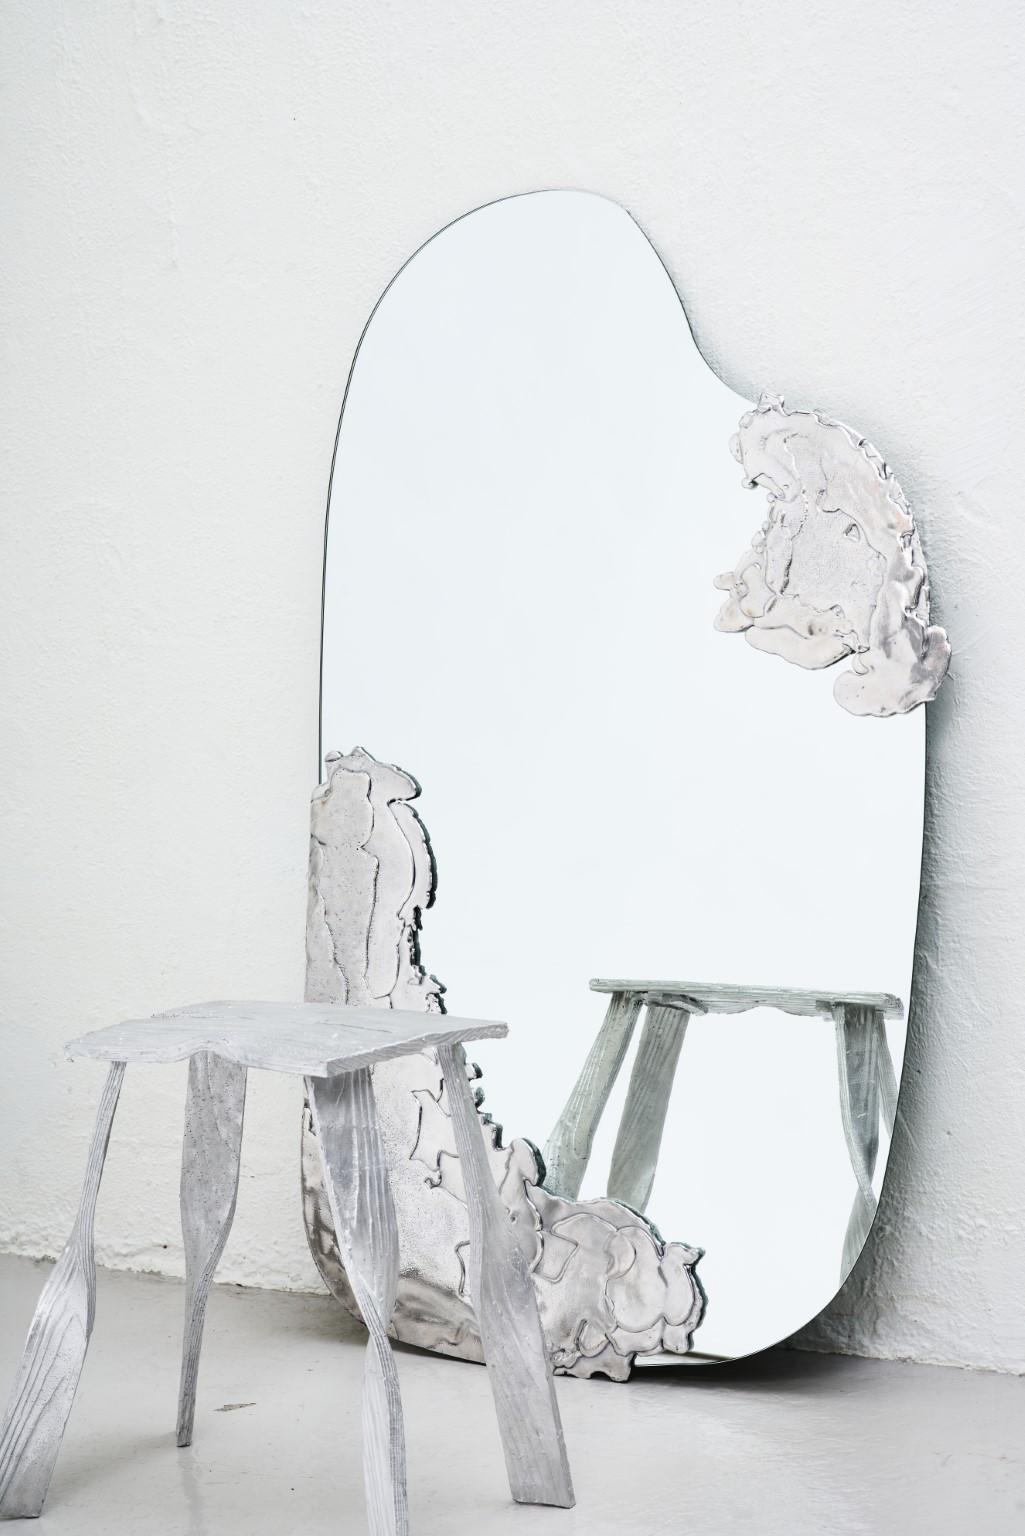 Lava mirror by Andredottir & Bobek
Dimensions: W 130 x H 70 cm
Materials: Mirror with aluminum
The lava mirror is handcrafted and one of a kind.

It is first shaped in vax and is subsequently cire perdue casted in aluminum which looks like floating